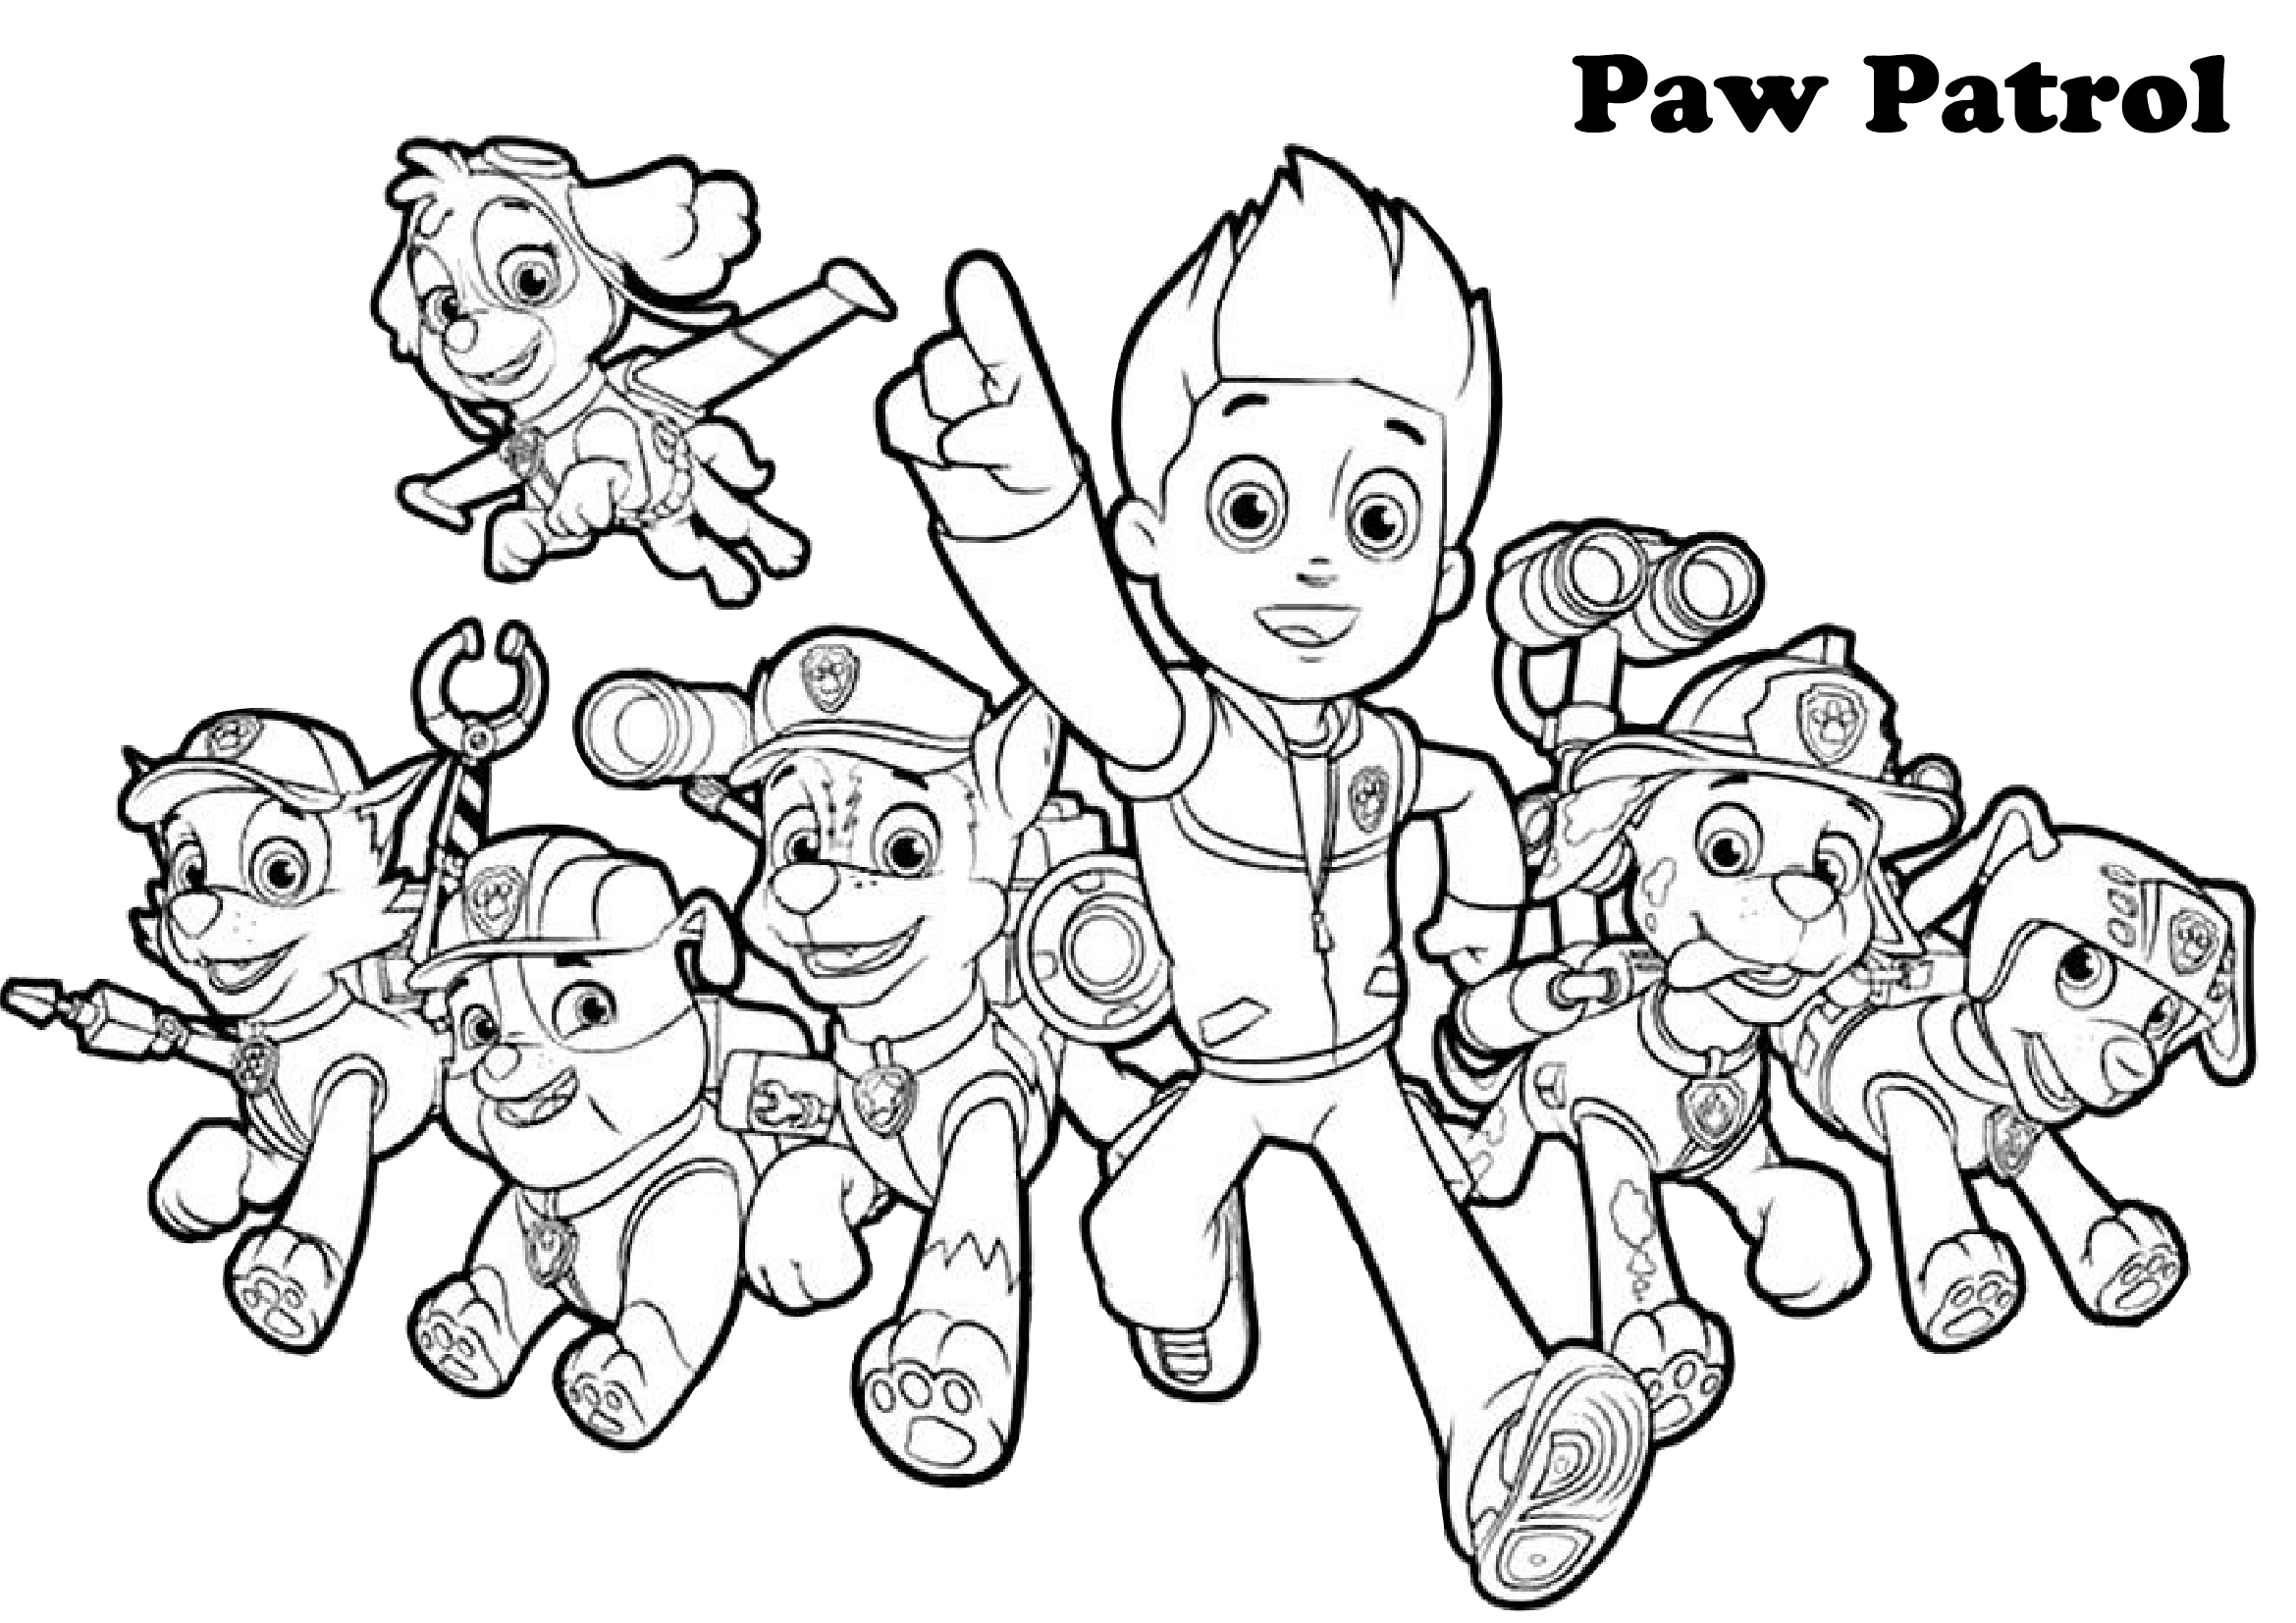 Paw patrol Coloring Page All Characters - Print Color Craft